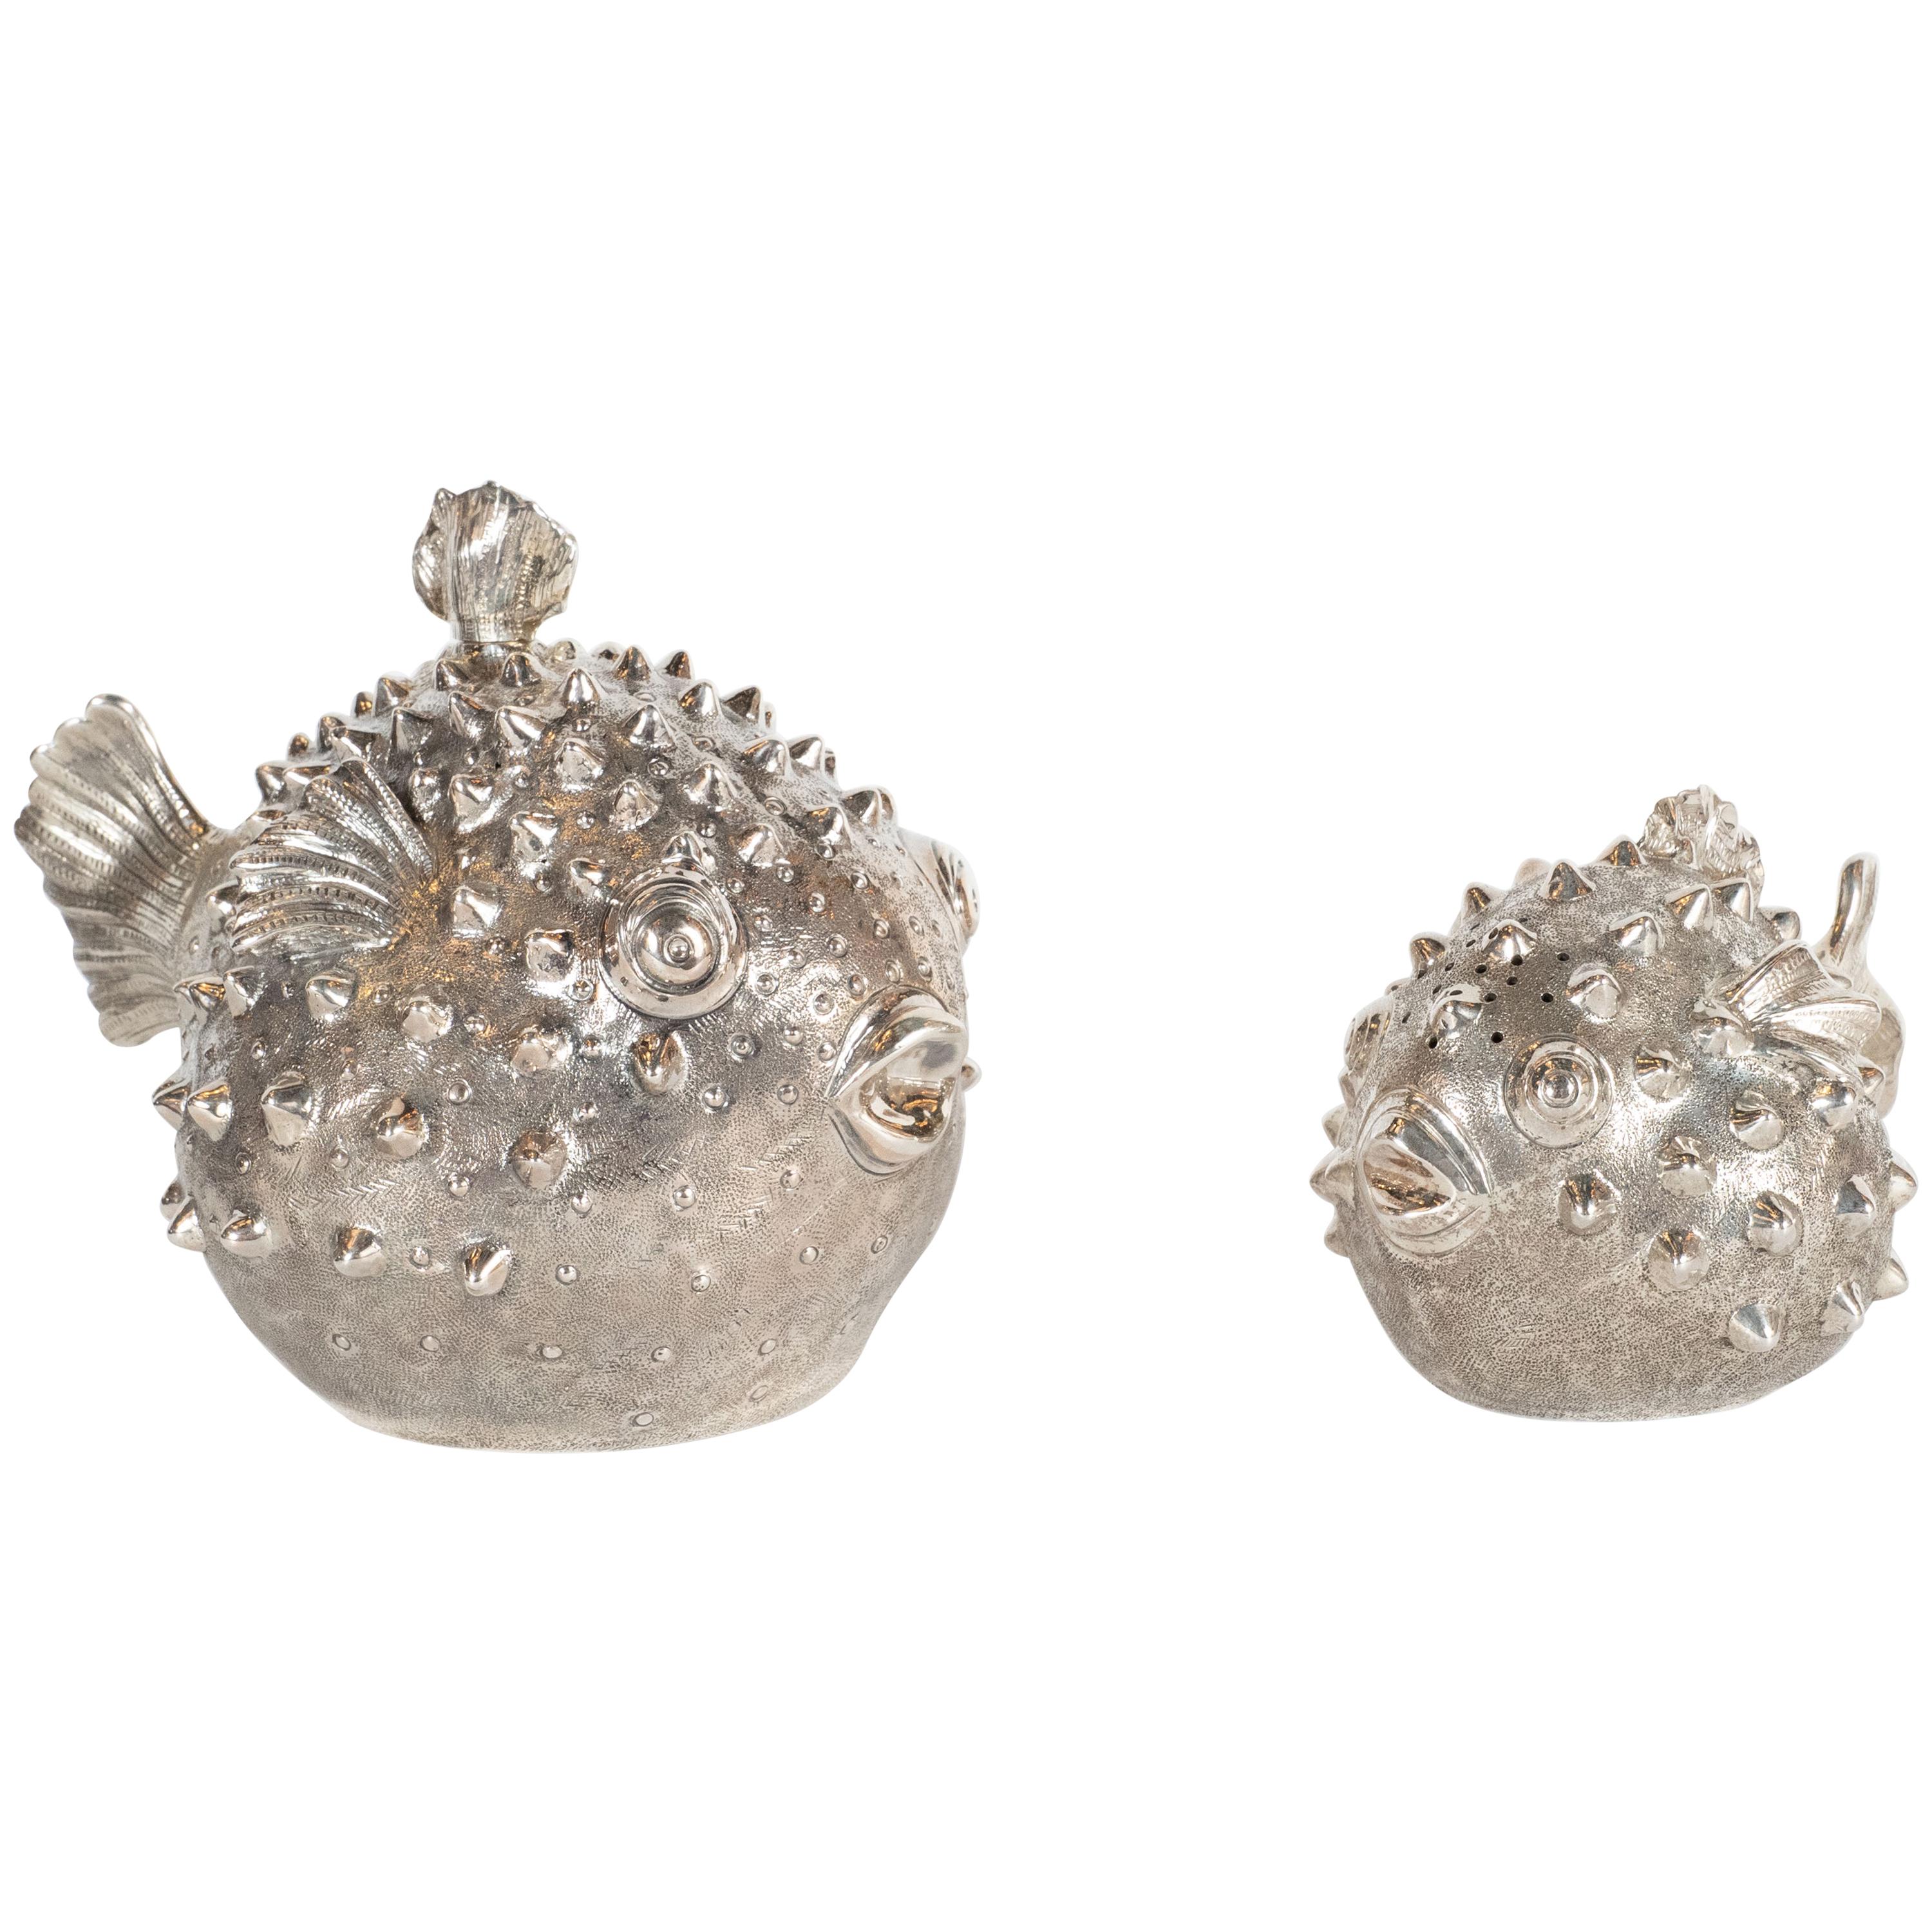 Handwrought Sterling Silver Puffer Fish Salt Shaker and Pepper Mill, Missiaglia